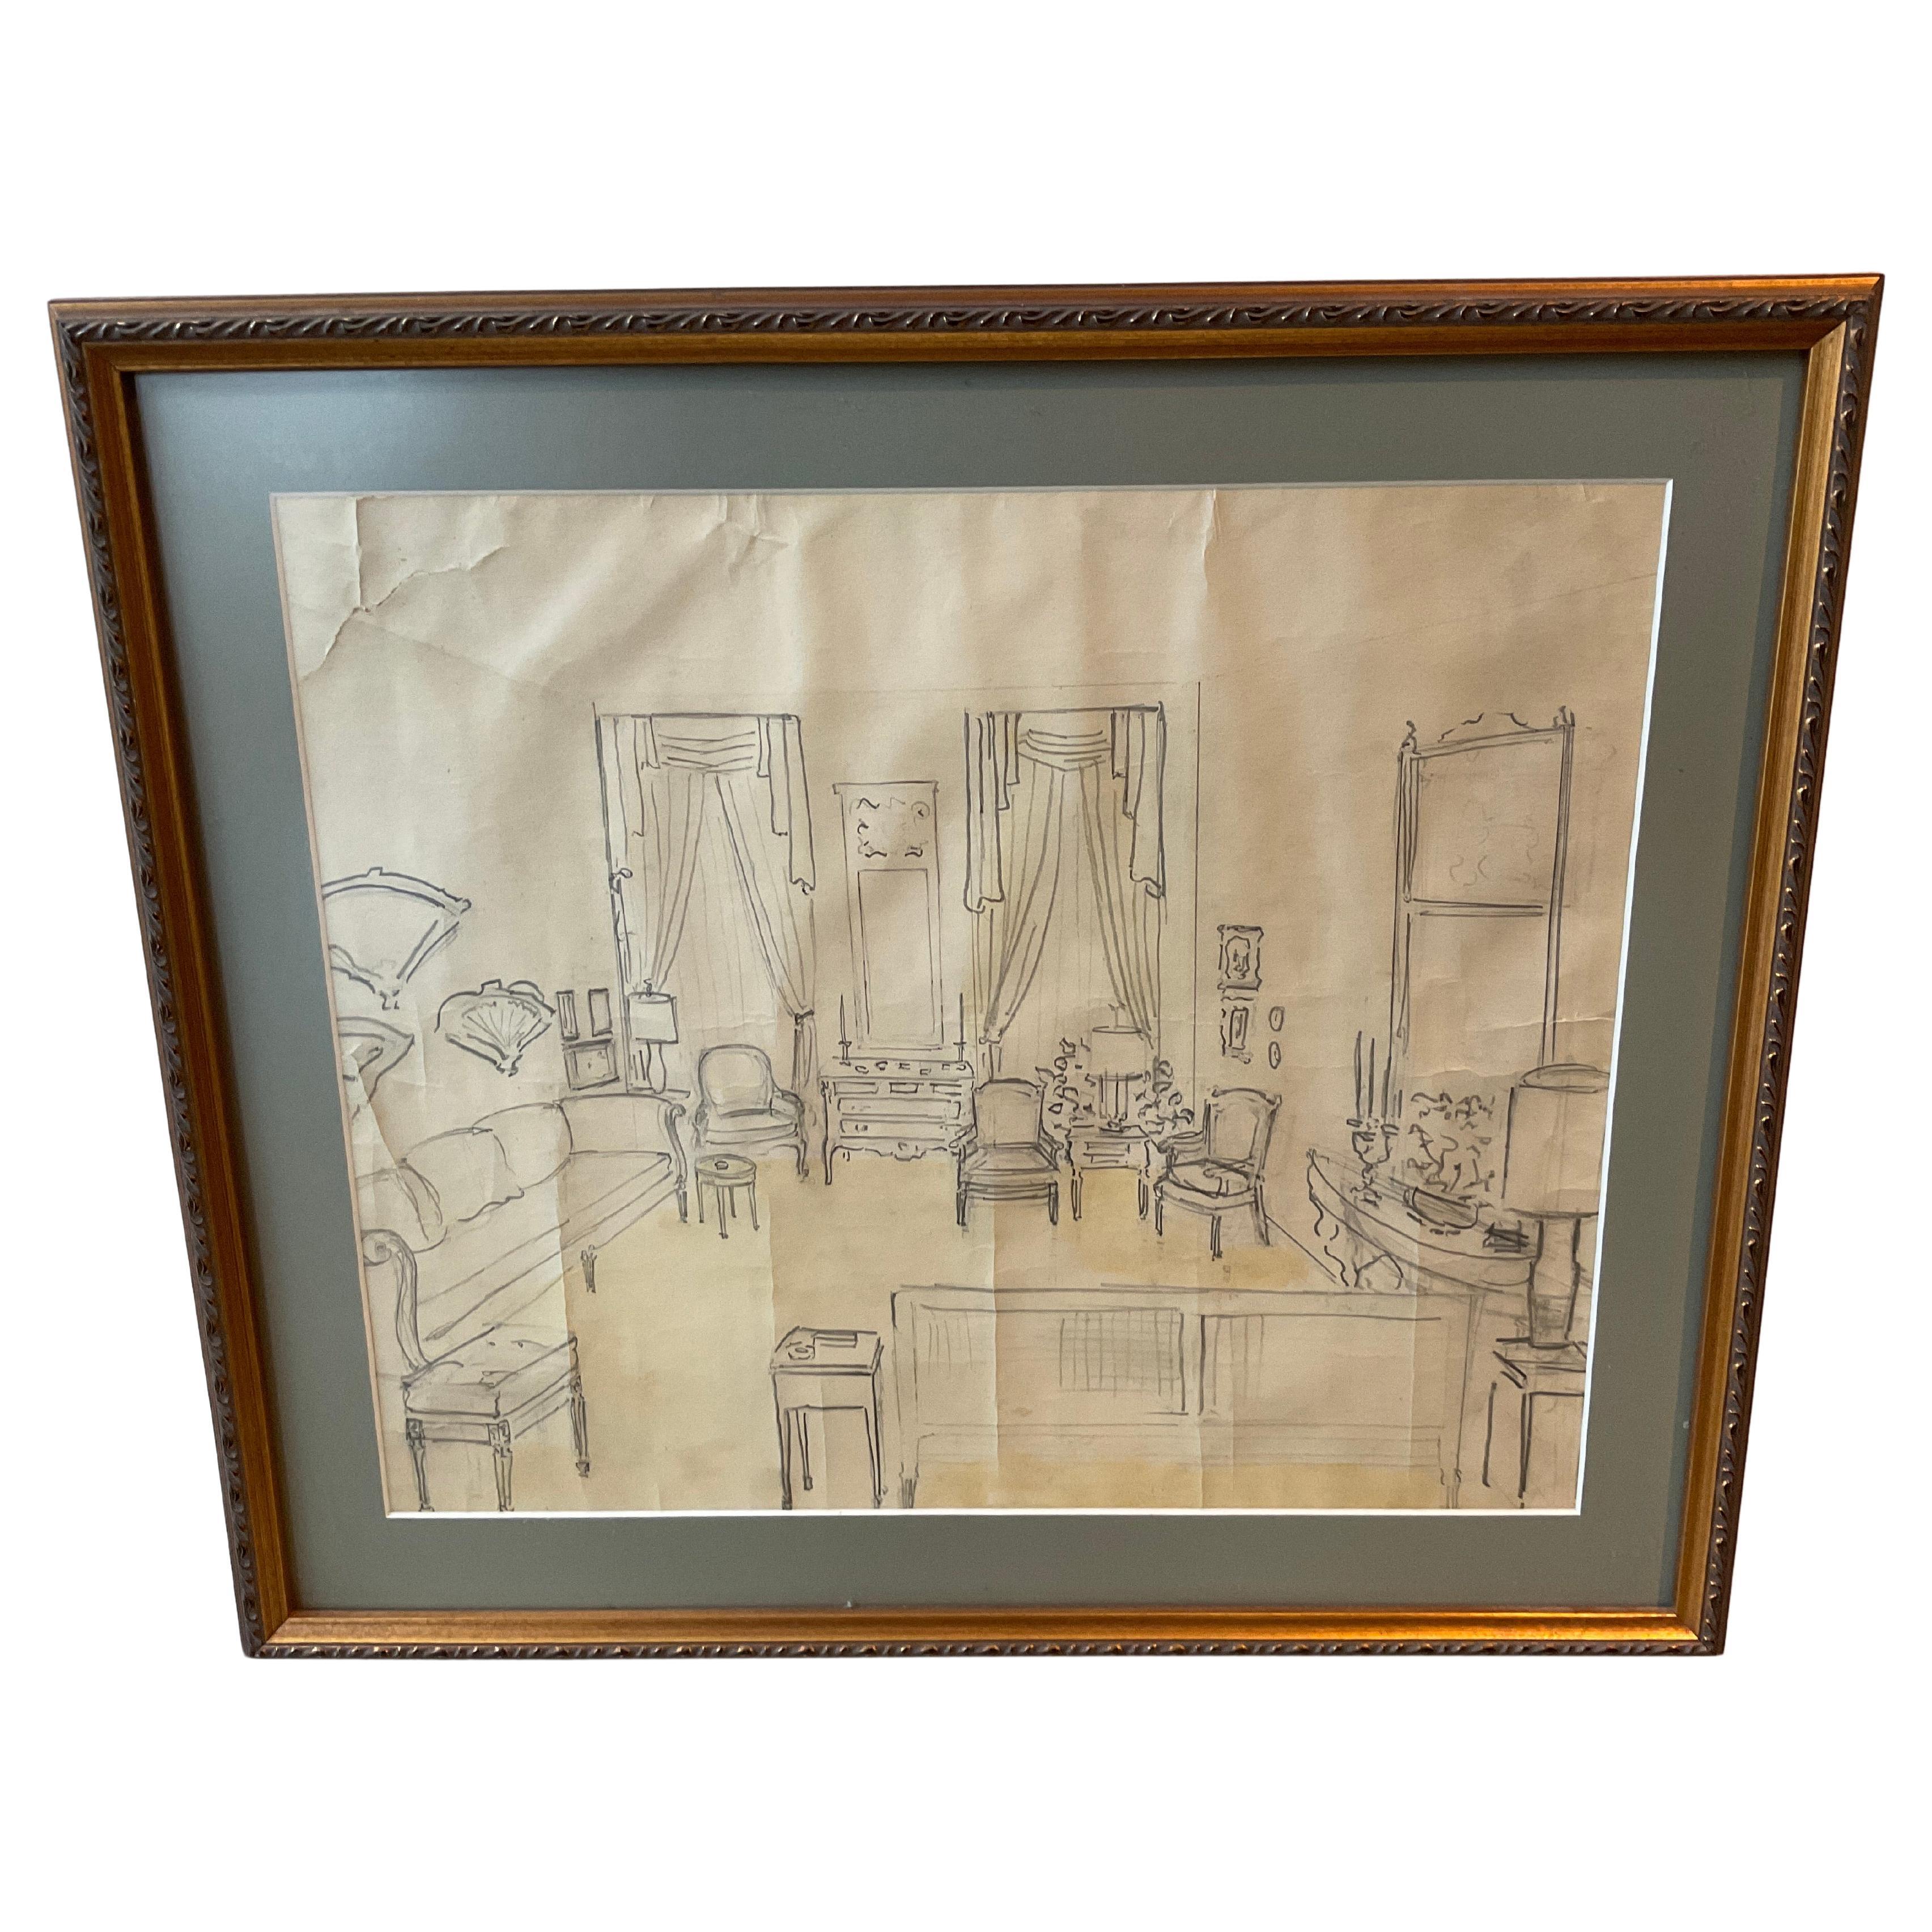 1930s Designers Drawing Of A Living Room Proposal For Sale